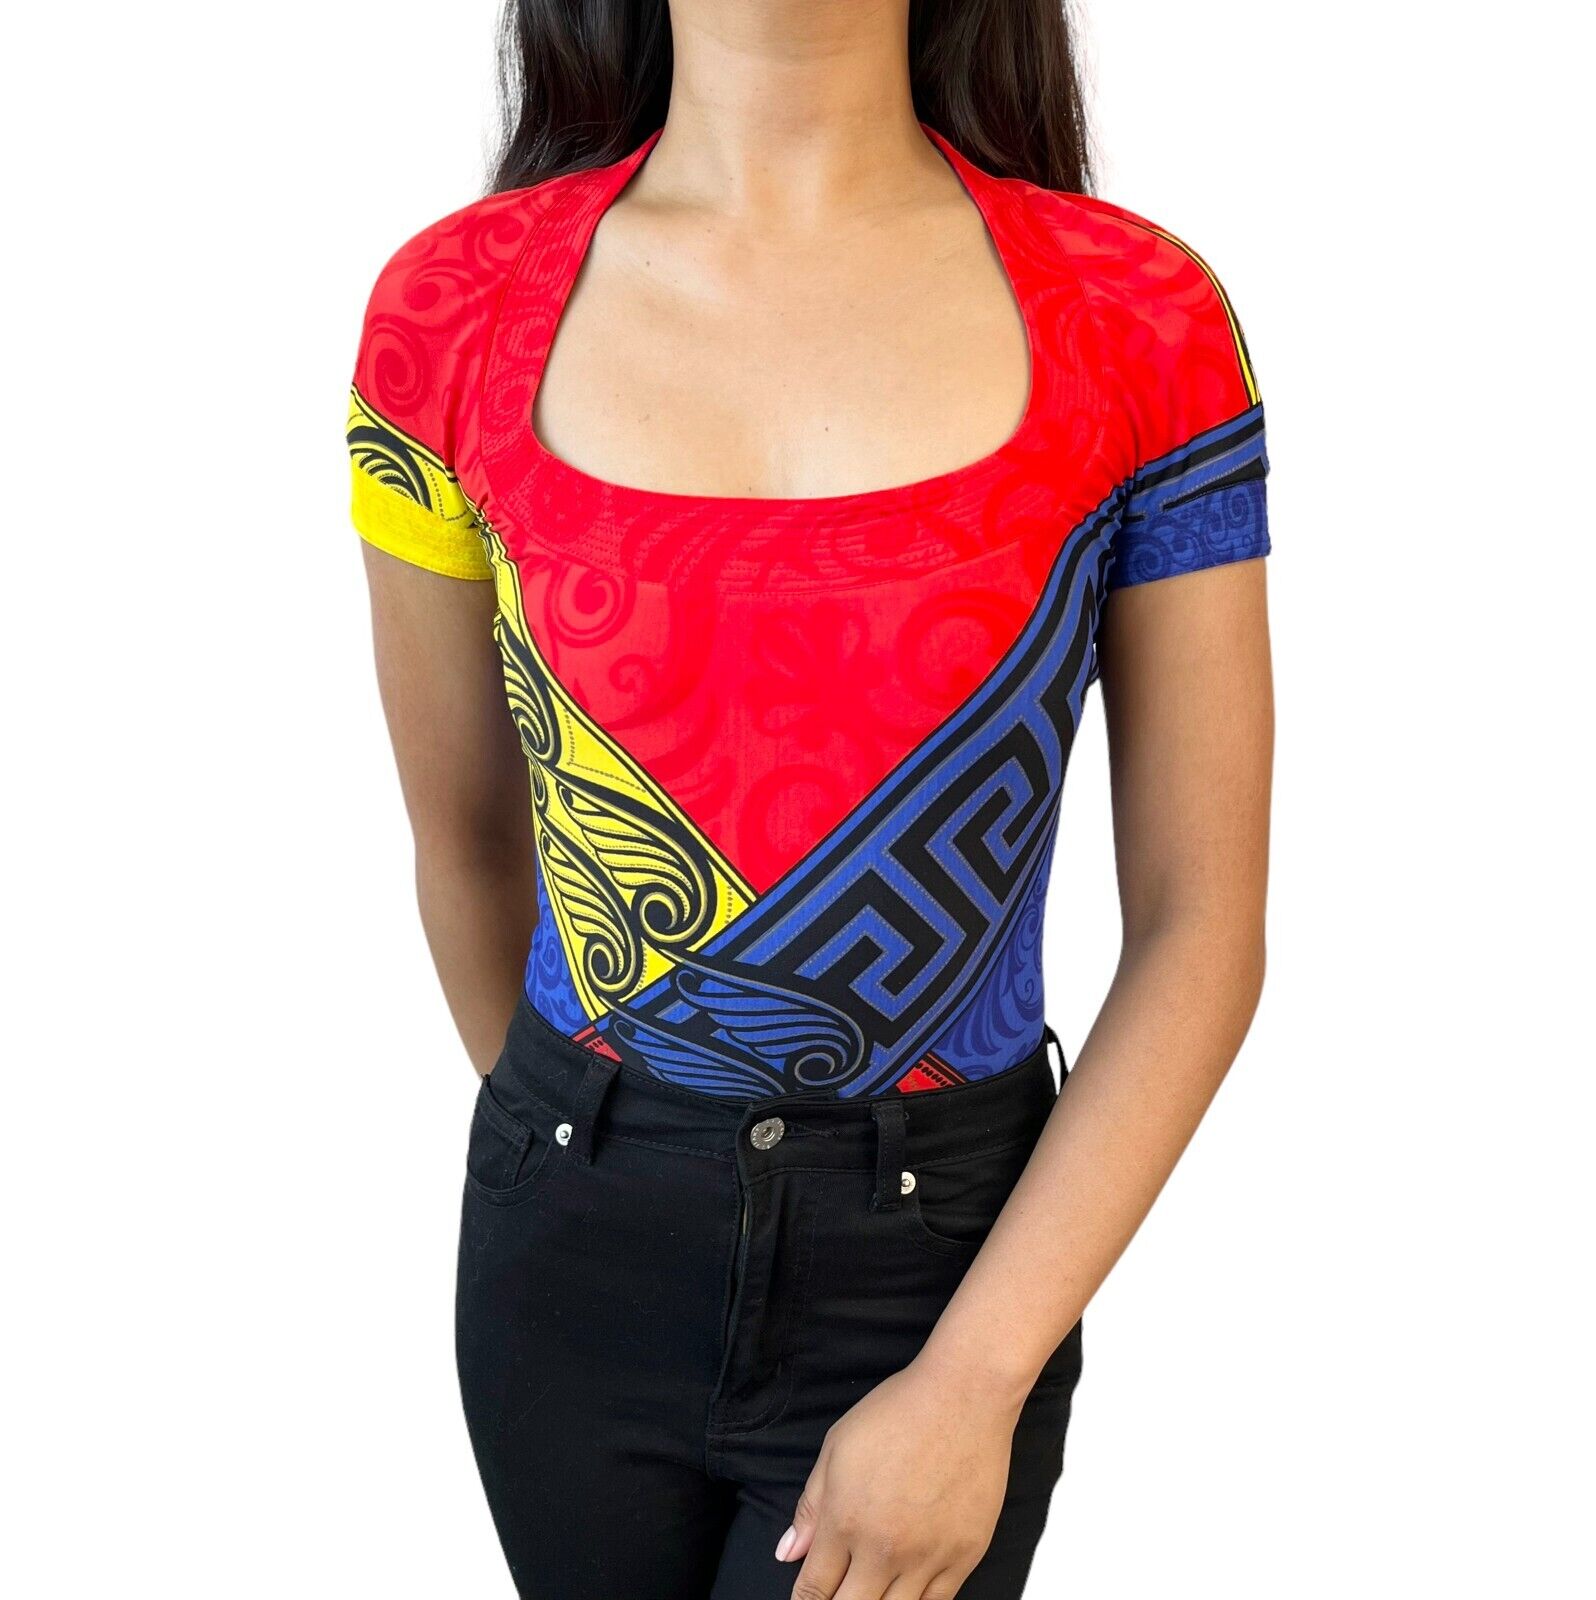 GIANNI VERSACE Vintage Short Sleeve Bodysuits One-Piece Red Yellow Rank AB